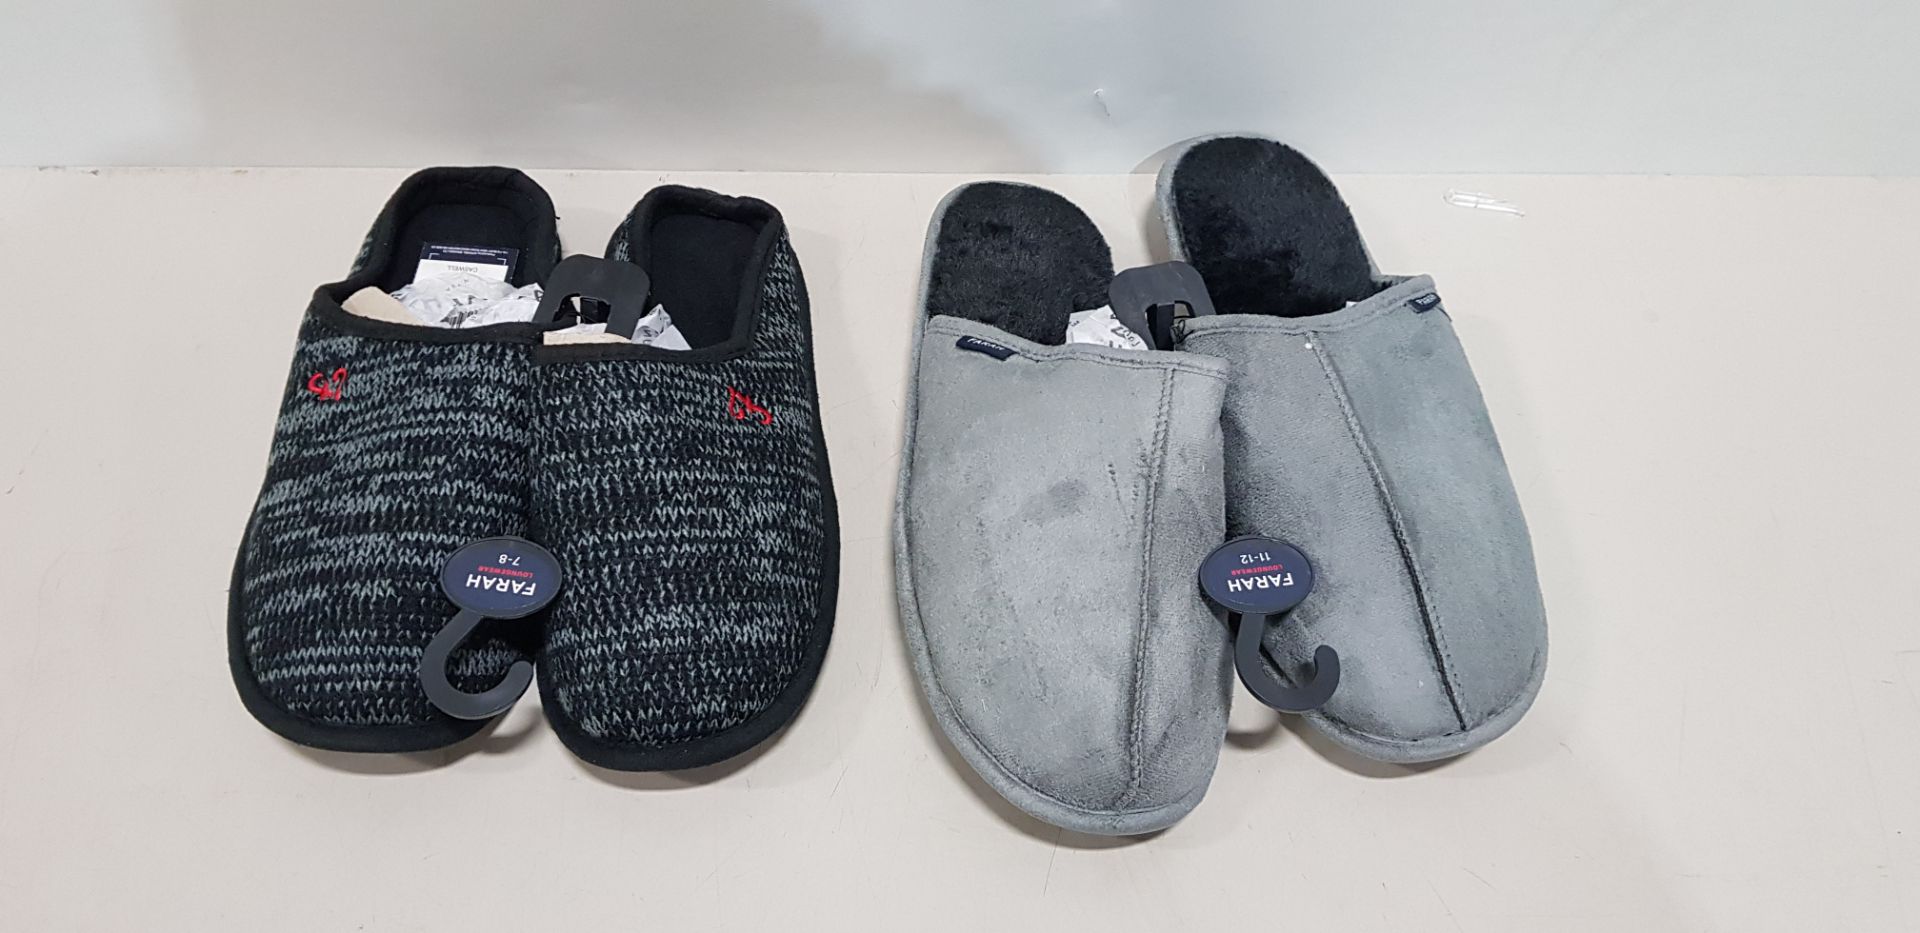 8 X PIECE MIX LOT CONTAINING MEN'S SLIPPERS 4 MEN'S CASWELL SLIPPERS WITH BLACK WITH GREY KNITTED